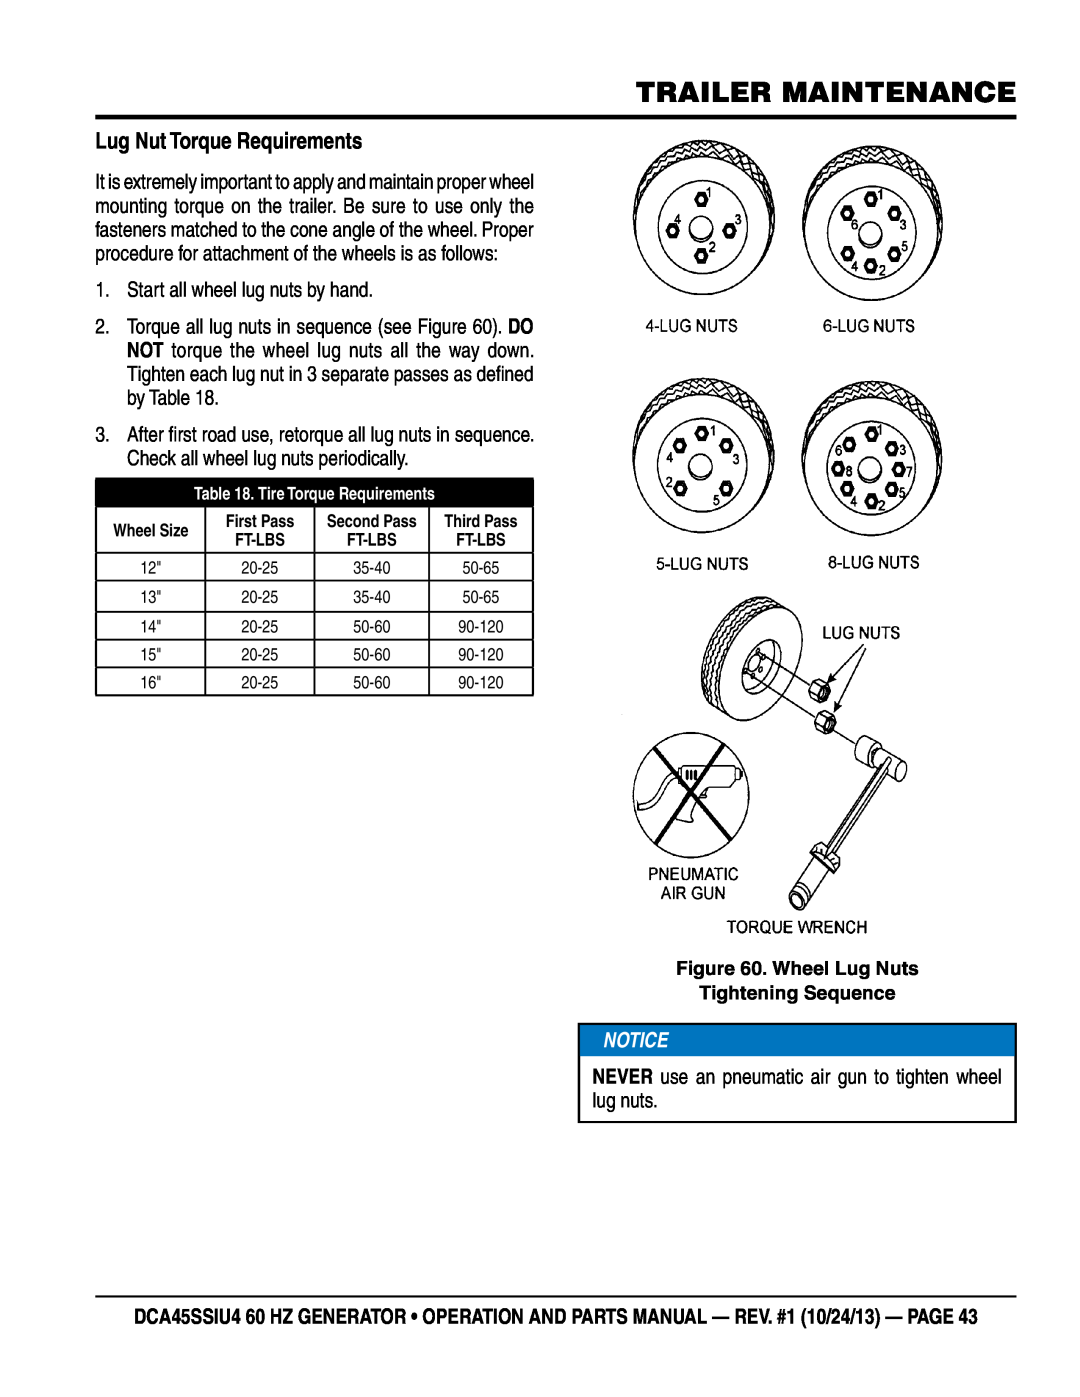 Multiquip dca45ssiu4 Lug Nut Torque Requirements, Trailer Maintenance, Wheel Lug Nuts Tightening Sequence, First Pass 